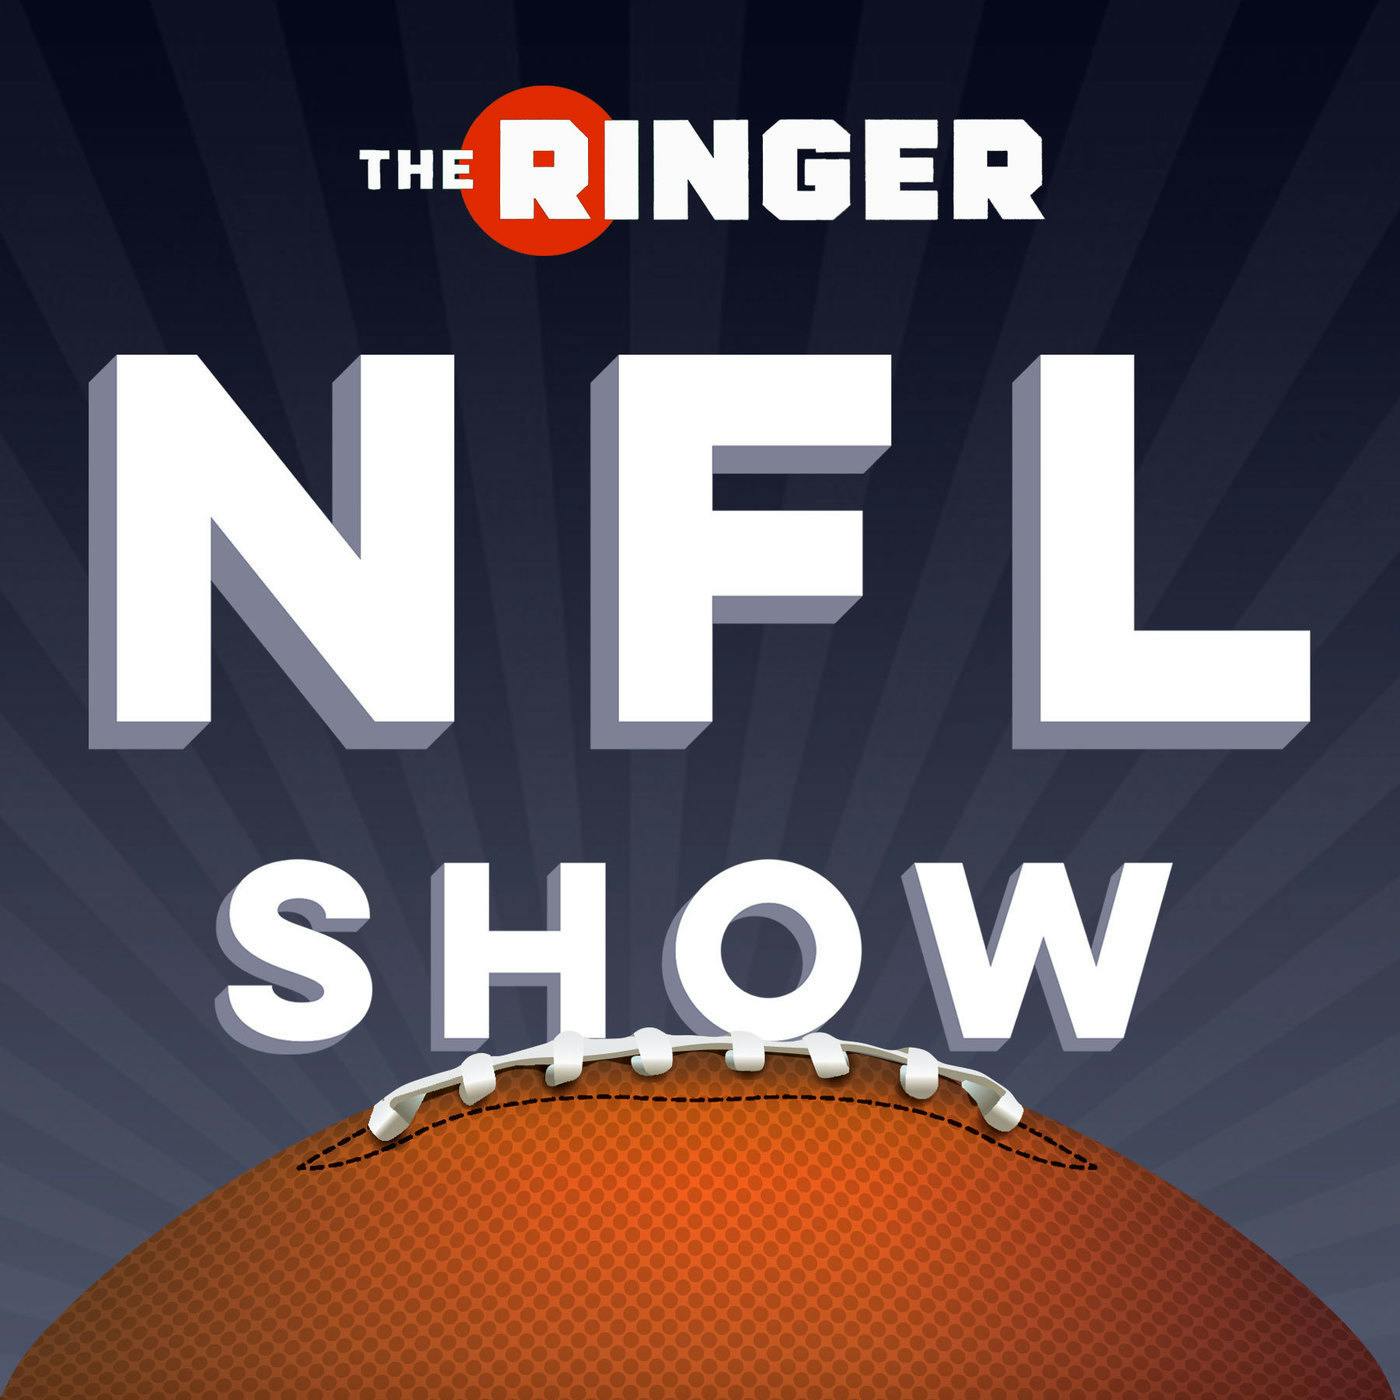 Gambling on the NFL and Injury Impacts | The Ringer NFL Show (Ep. 264)